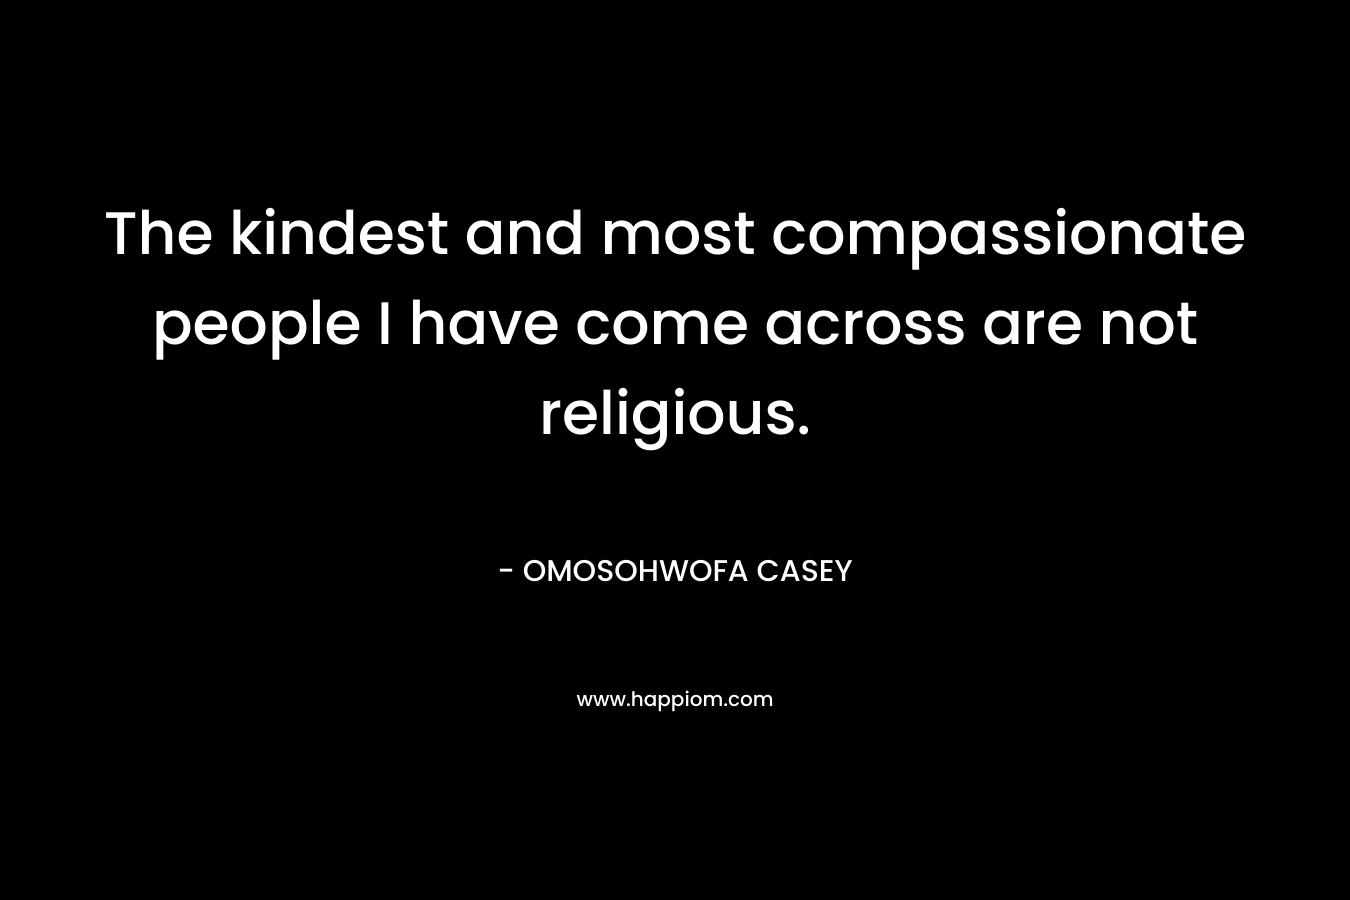 The kindest and most compassionate people I have come across are not religious.